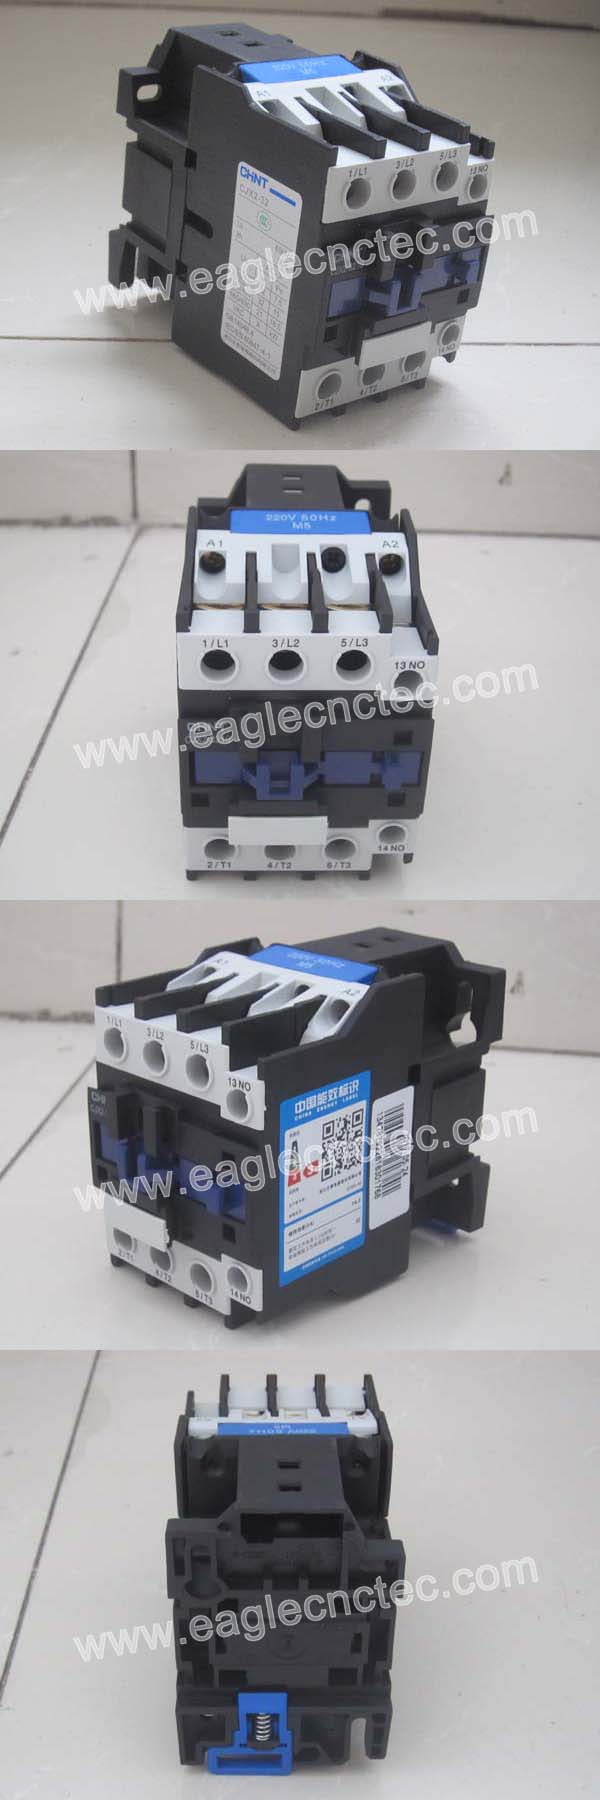 cnc router contactor